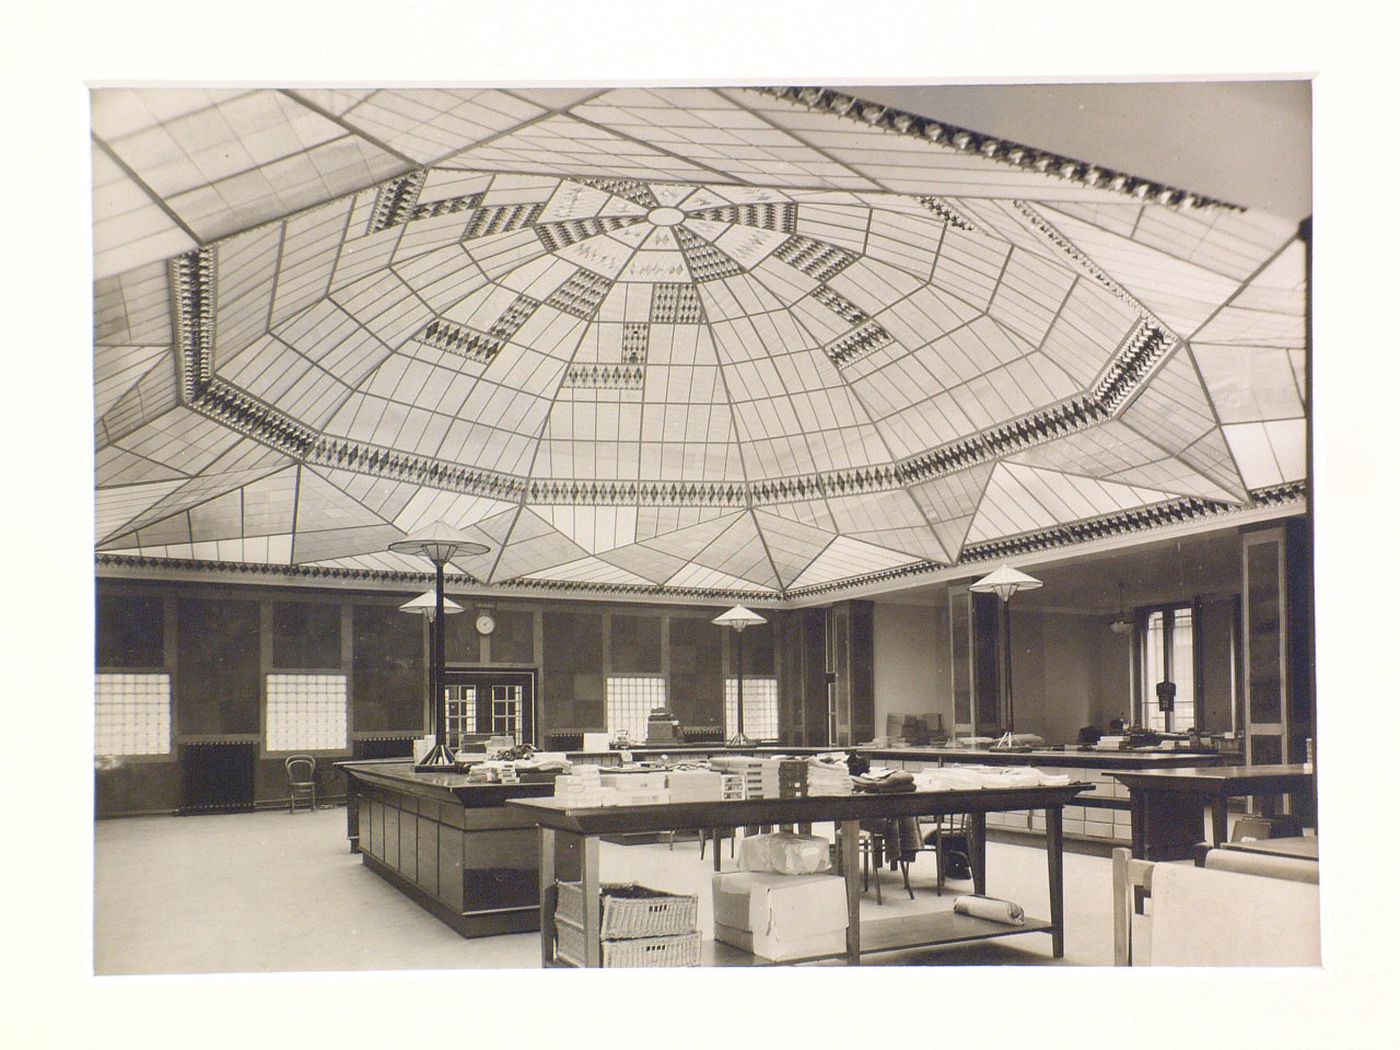 Interior view of glass roofed court, Heinrich Mittag's Department Store, Magdeburg, Germany